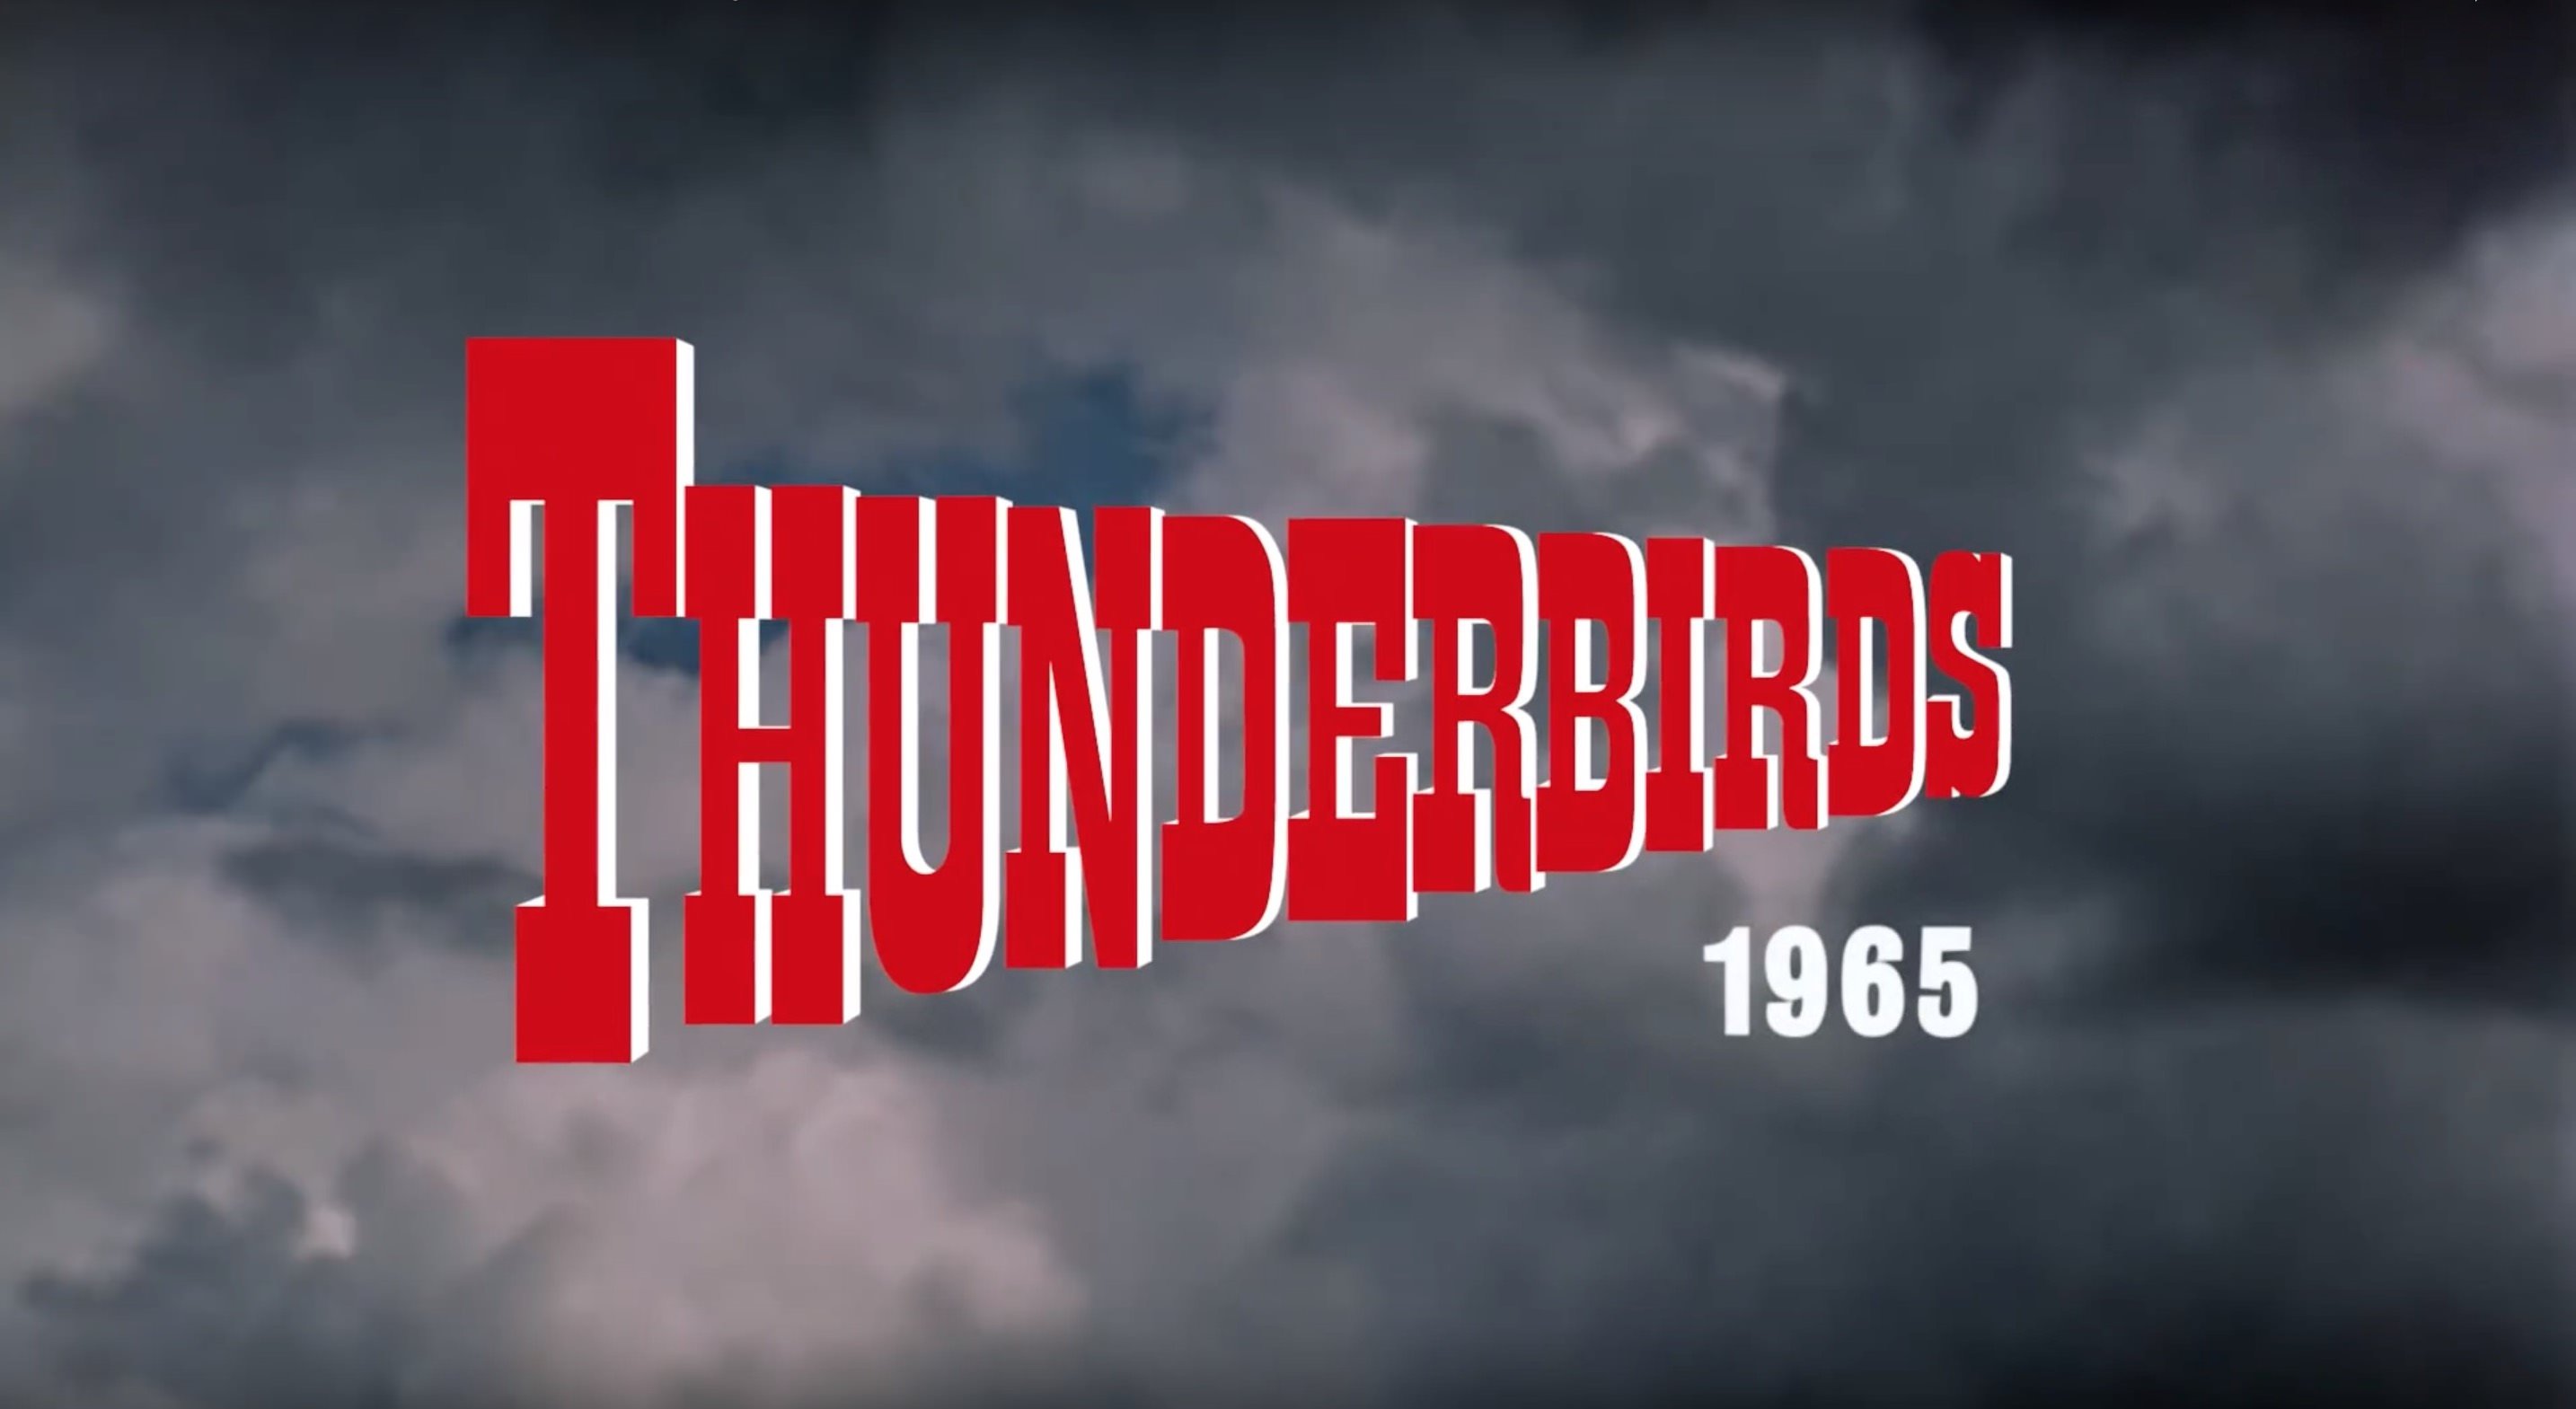 Documentary: Thunderbirds 1965 - The Successful Project To Create 3 New  Thunderbirds Episodes